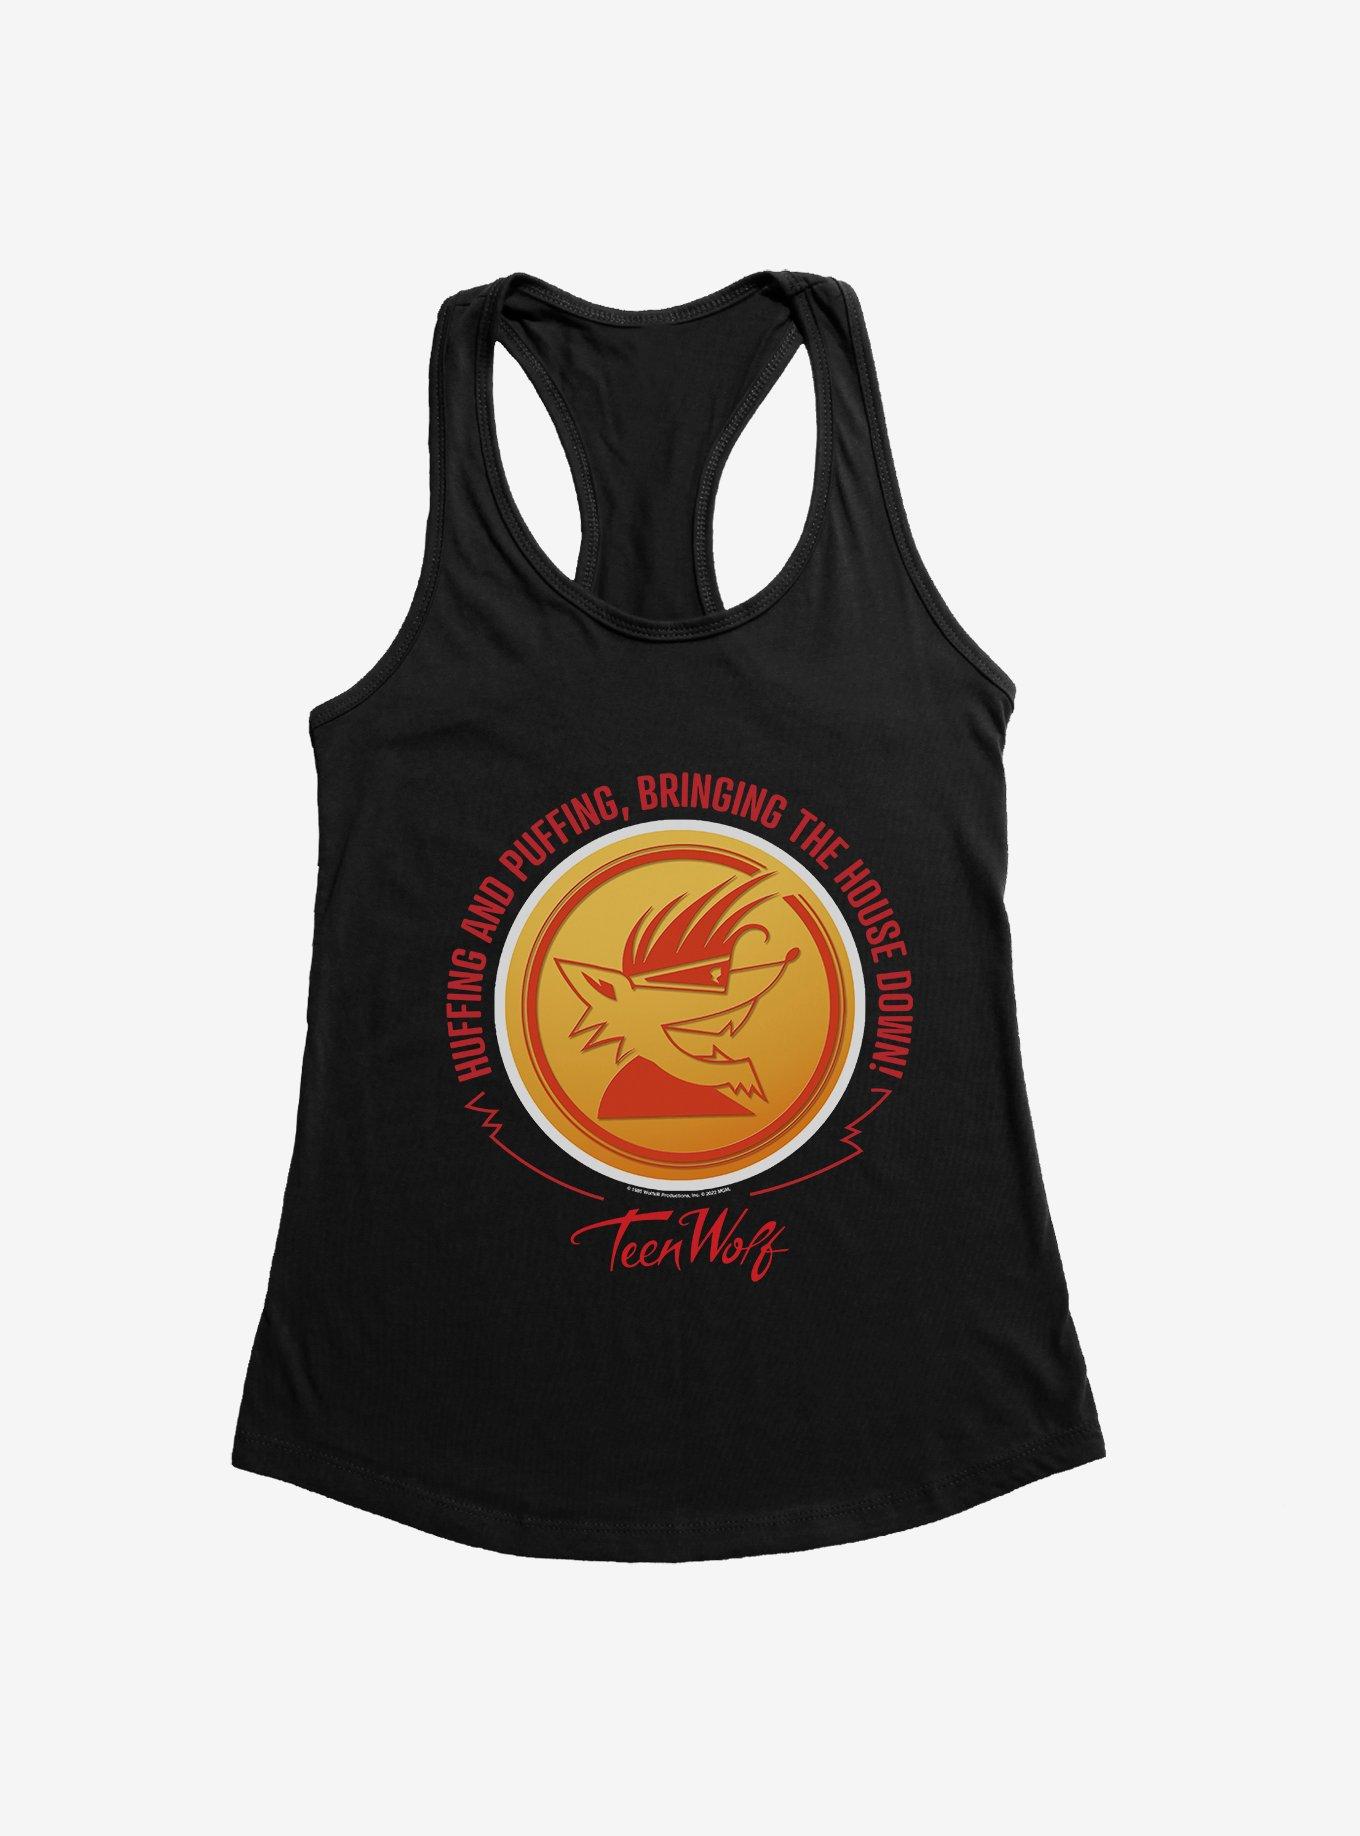 Teen Wolf Huffing and Puffing Womens Tank Top, BLACK, hi-res